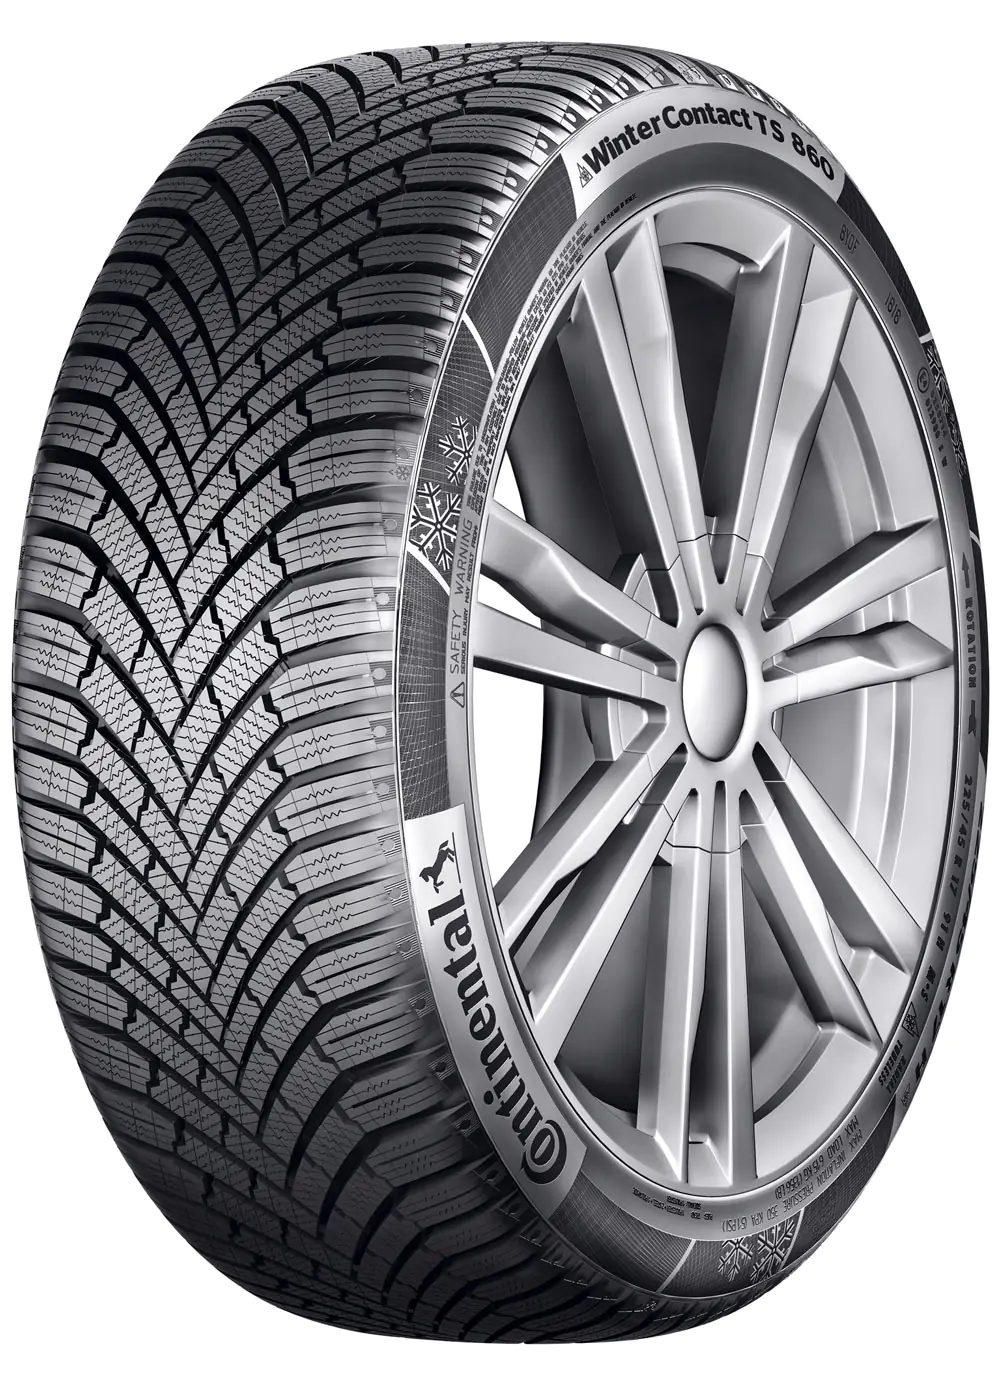 Gomme Autovettura Continental 325/40 R22 114V WinterContact TS870 P FR M+S Invernale